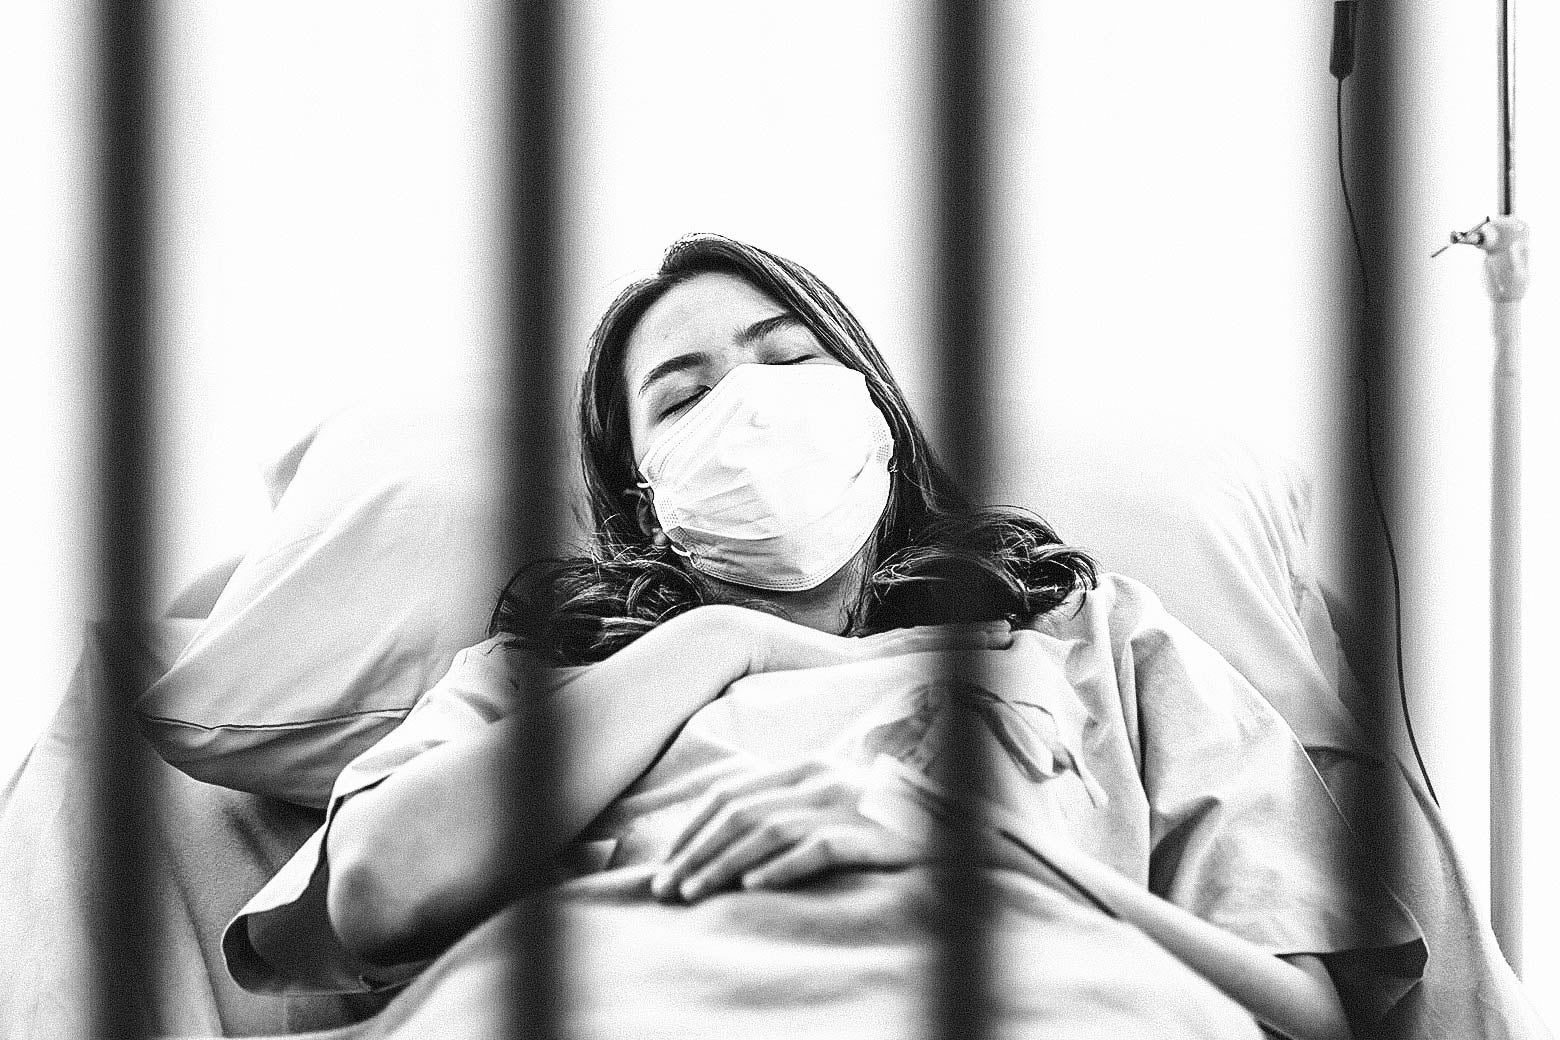 A woman lying on a hospital bed behind bars and wearing a face mask